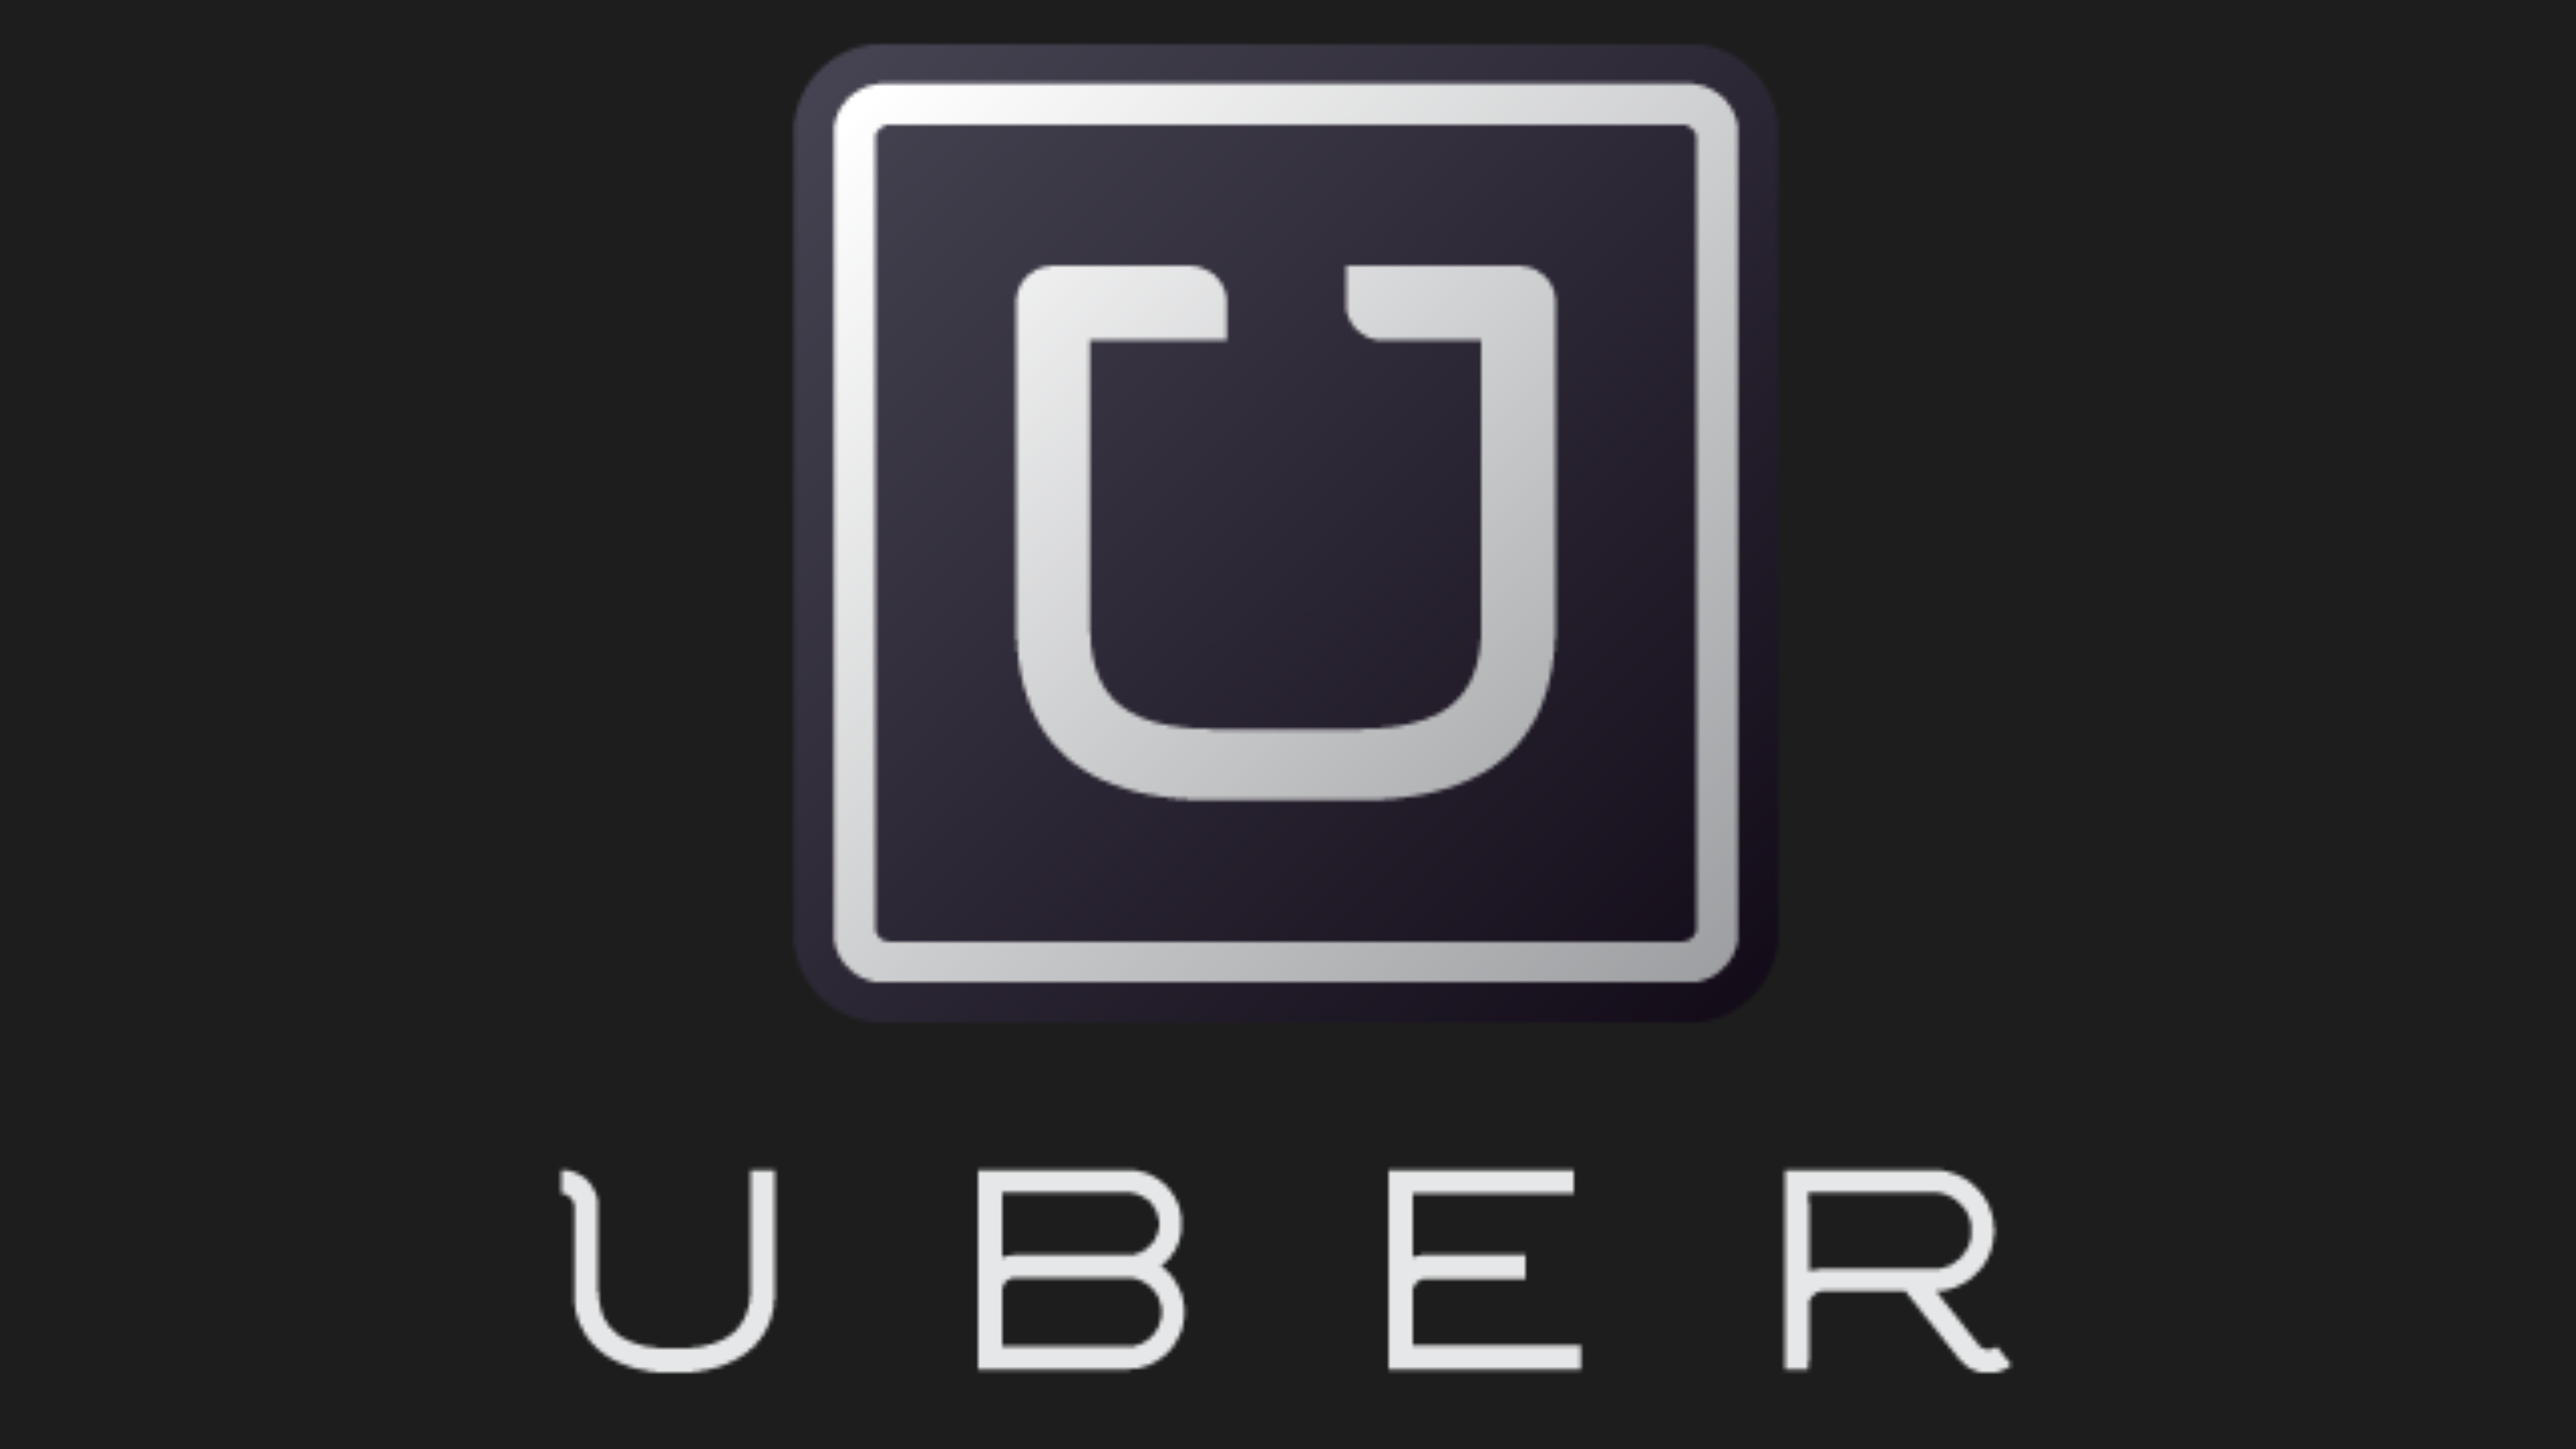 Pennsylvania Proposes $50M Fine Against Uber For Operating Without Approval